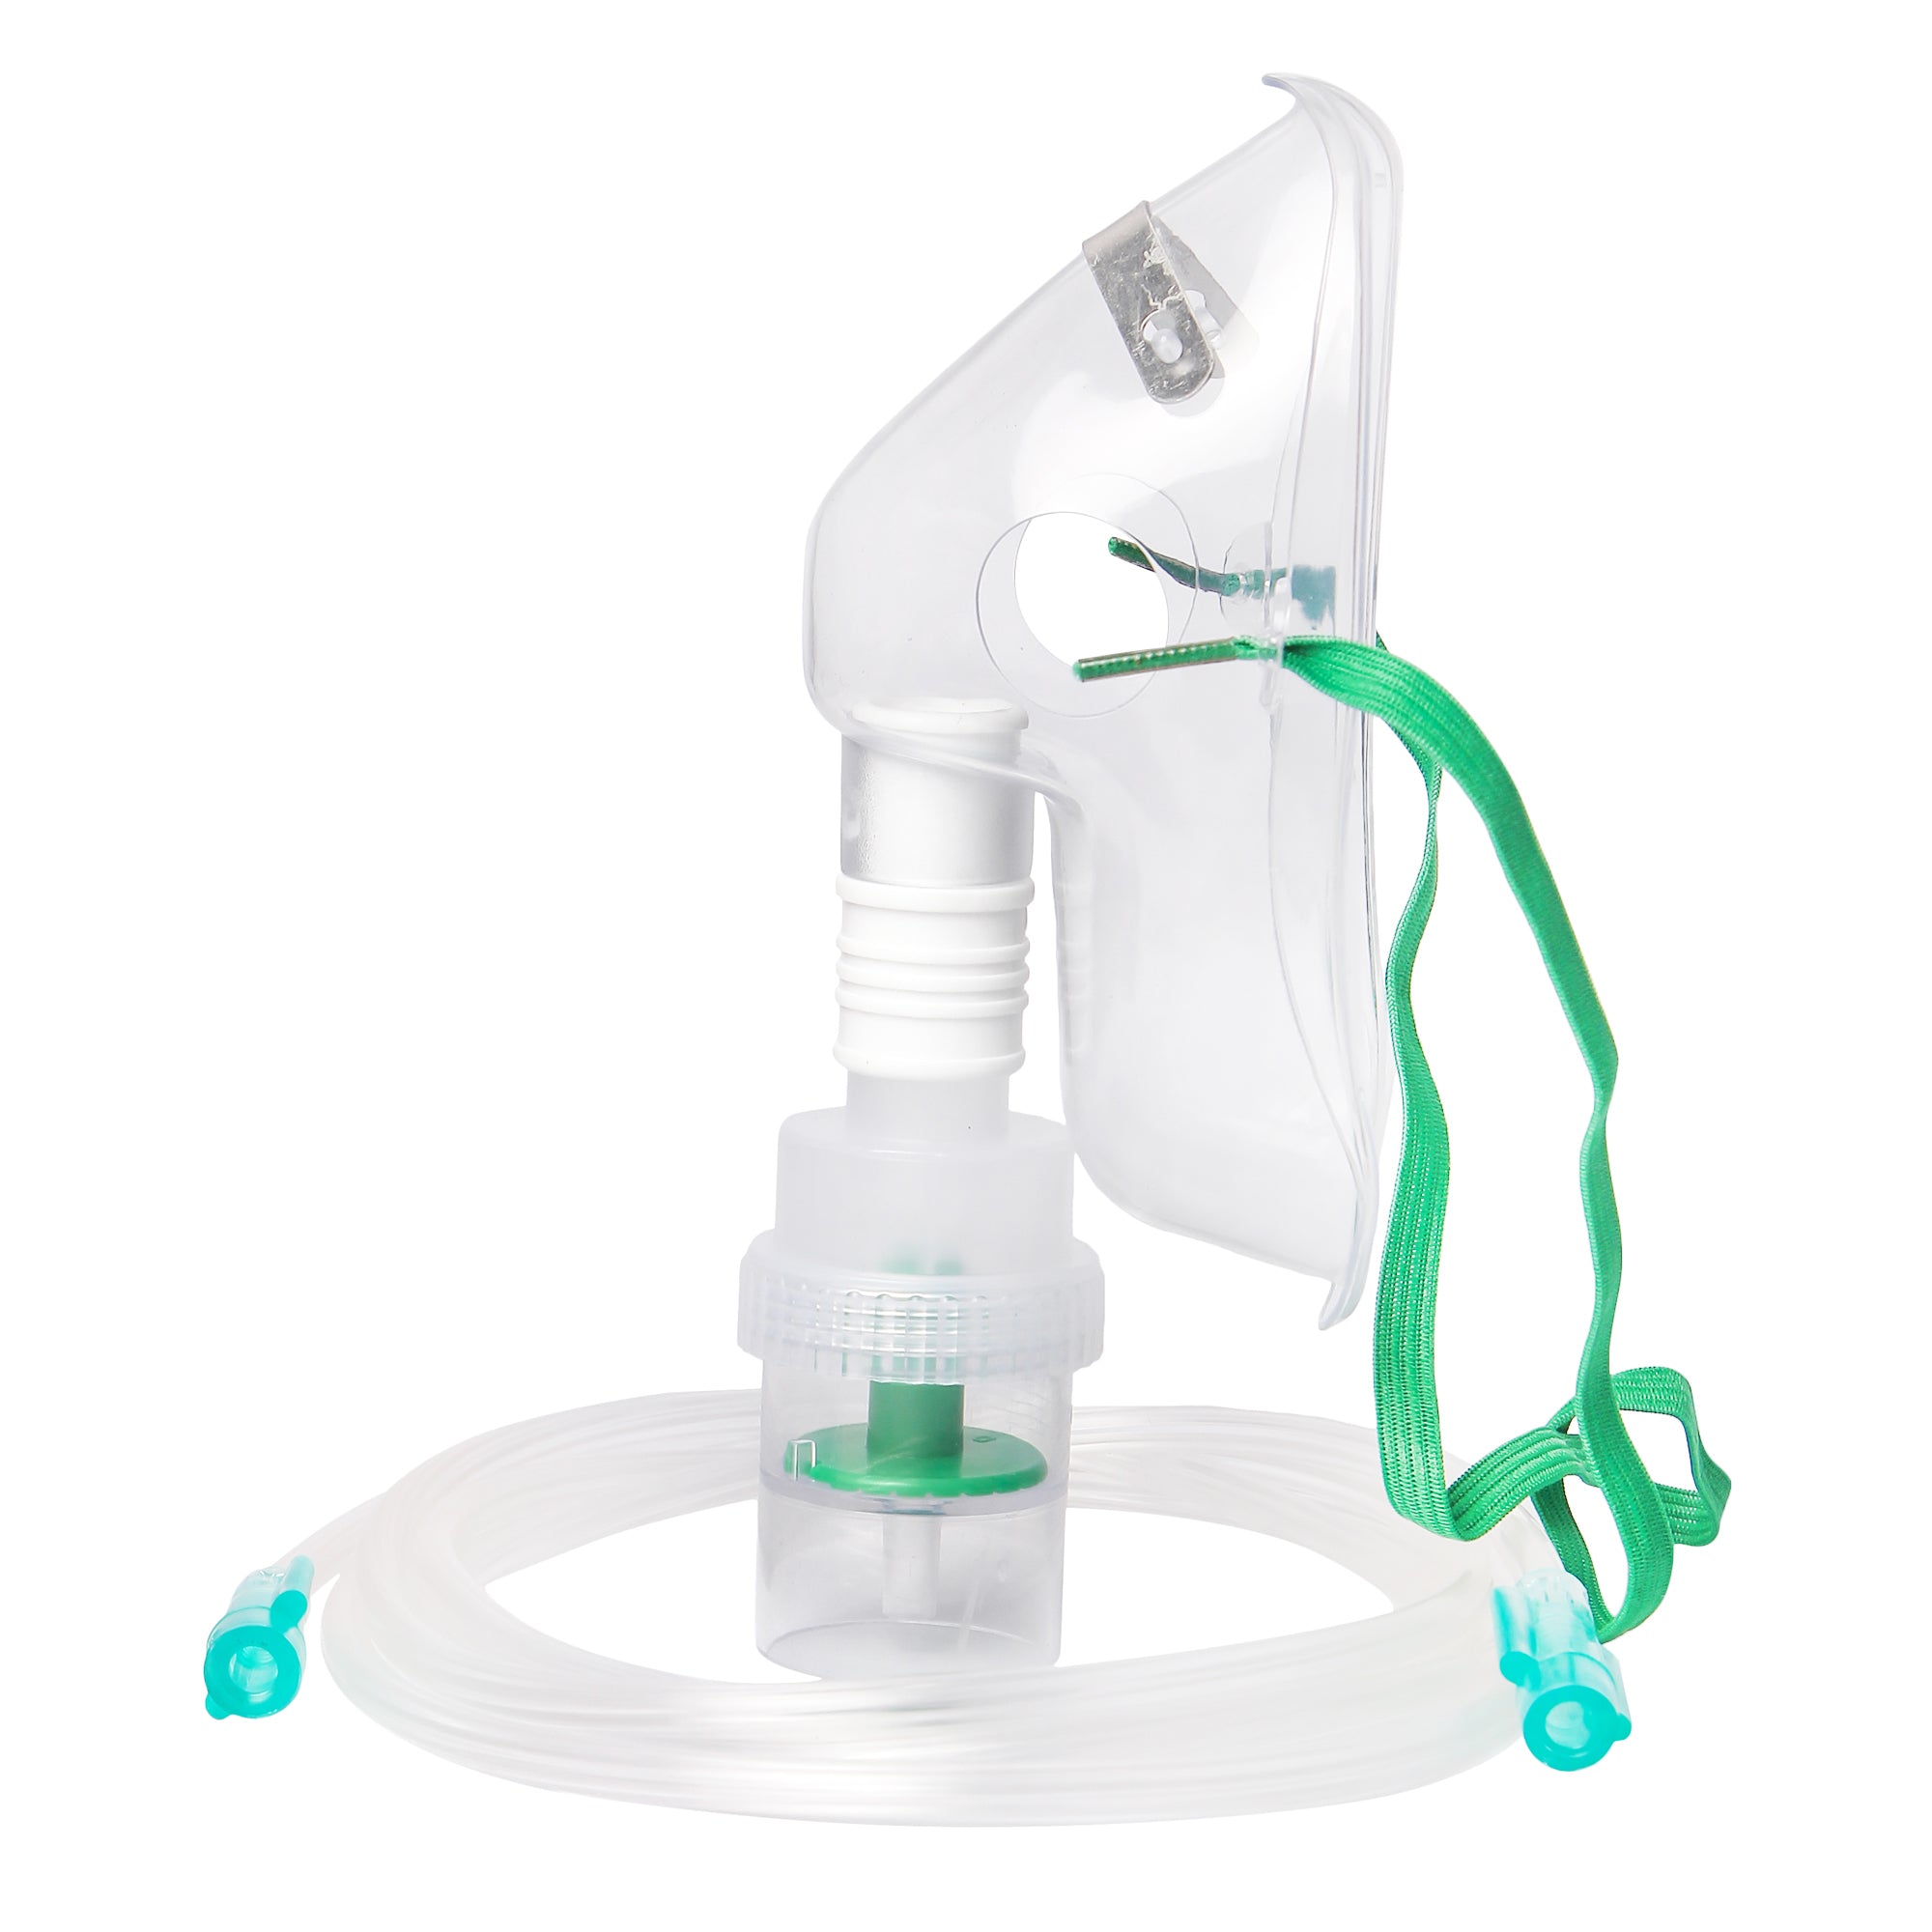 Control D Adult Mask Kit with Air Tube, Medicine Chamber & Mask Nebulizer